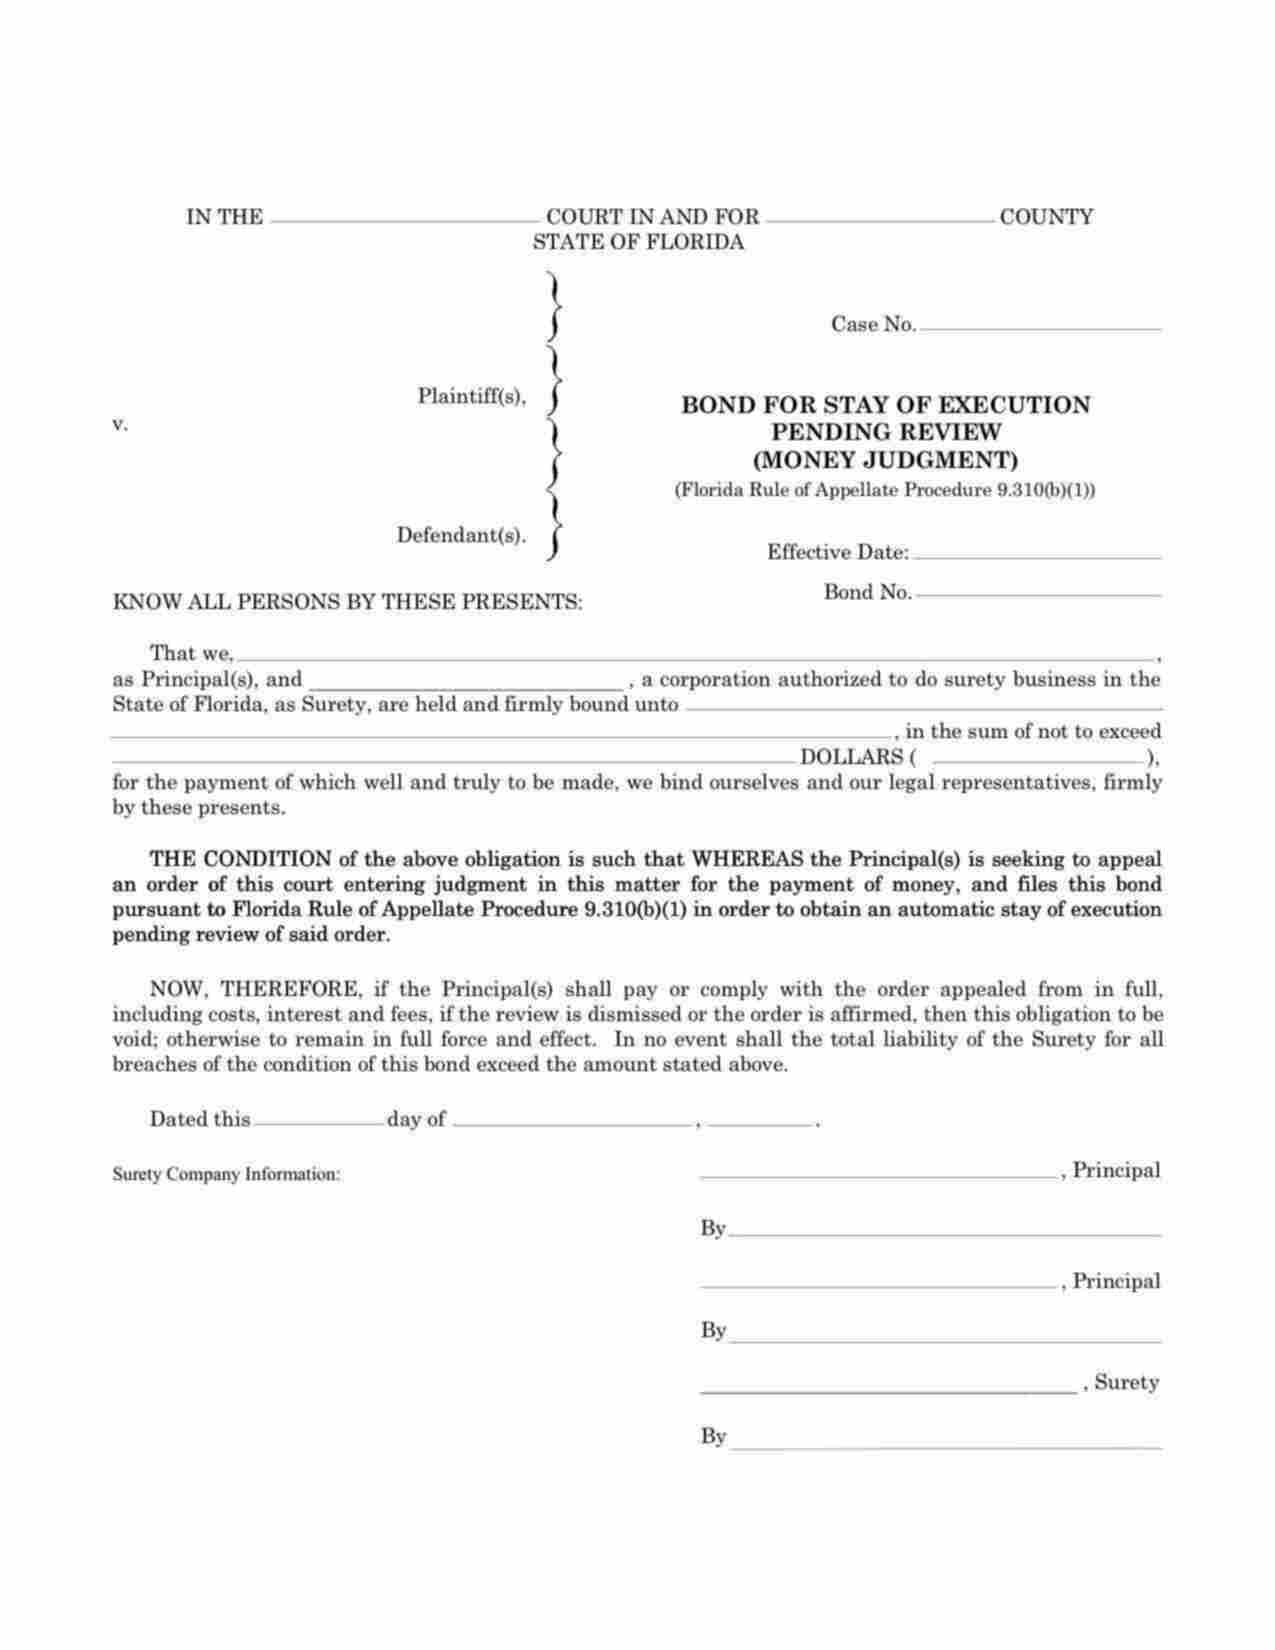 Florida Stay of Execution Pending Review (Money Judgment) Bond Form